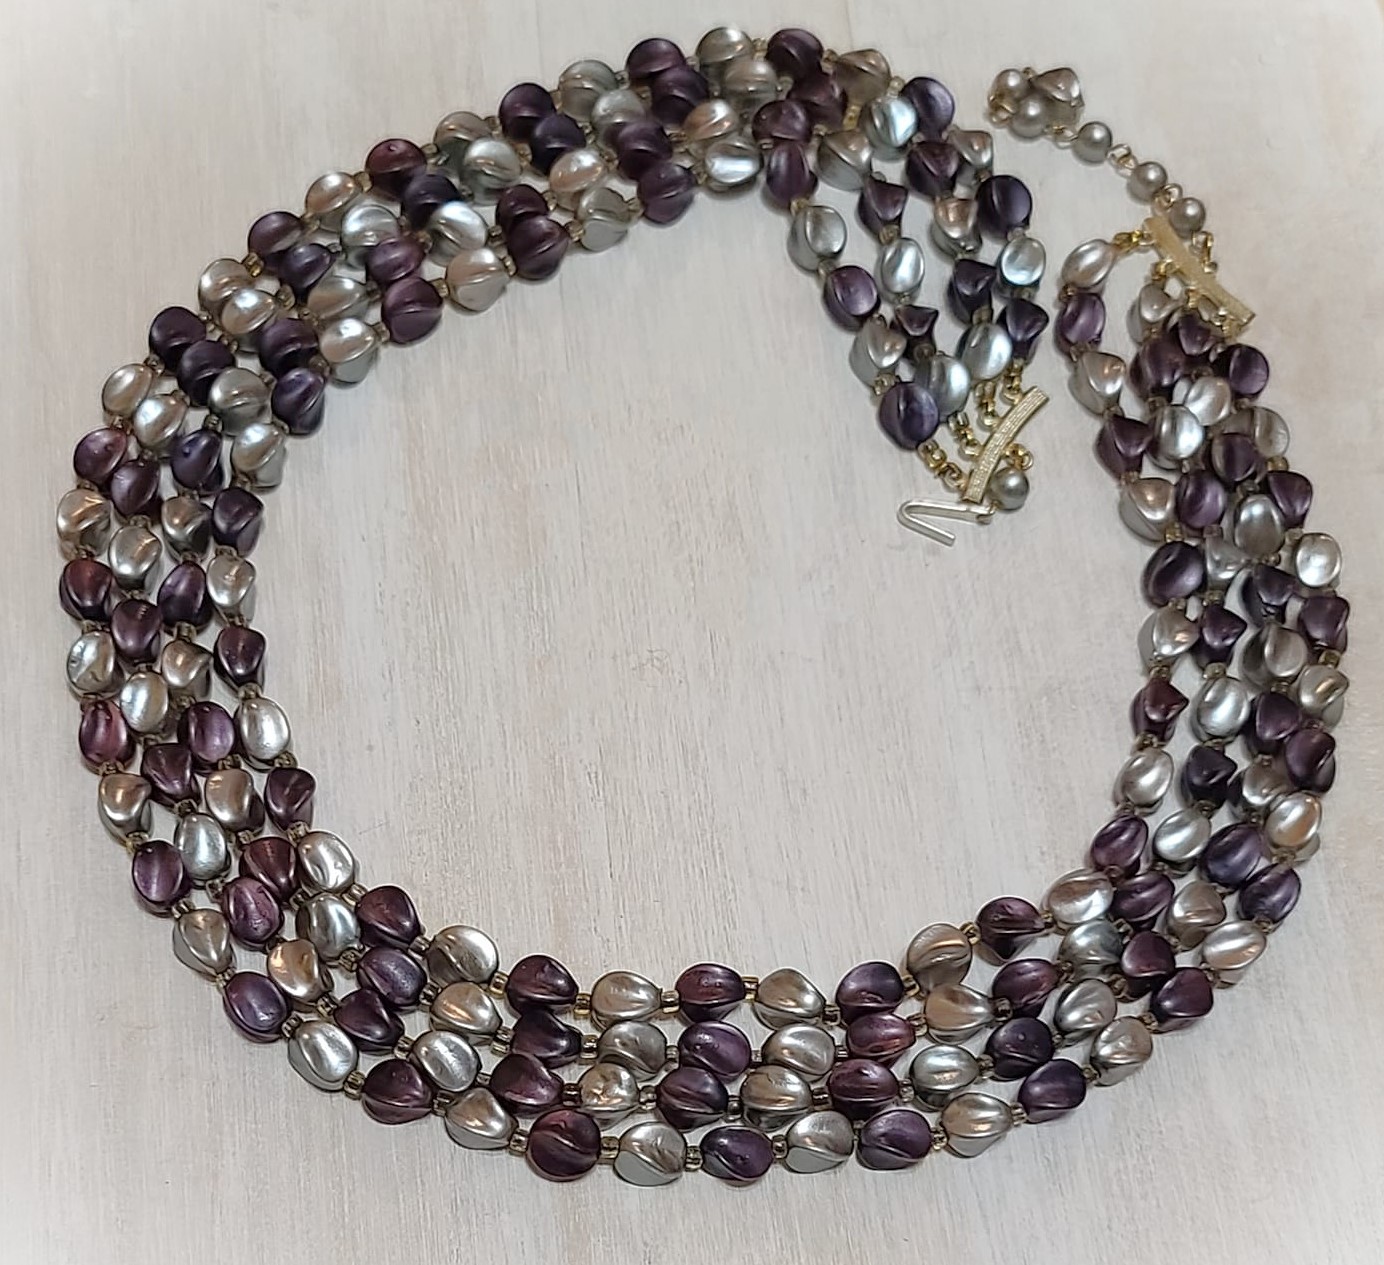 Metallic purple and gray 4 strand vintage necklace